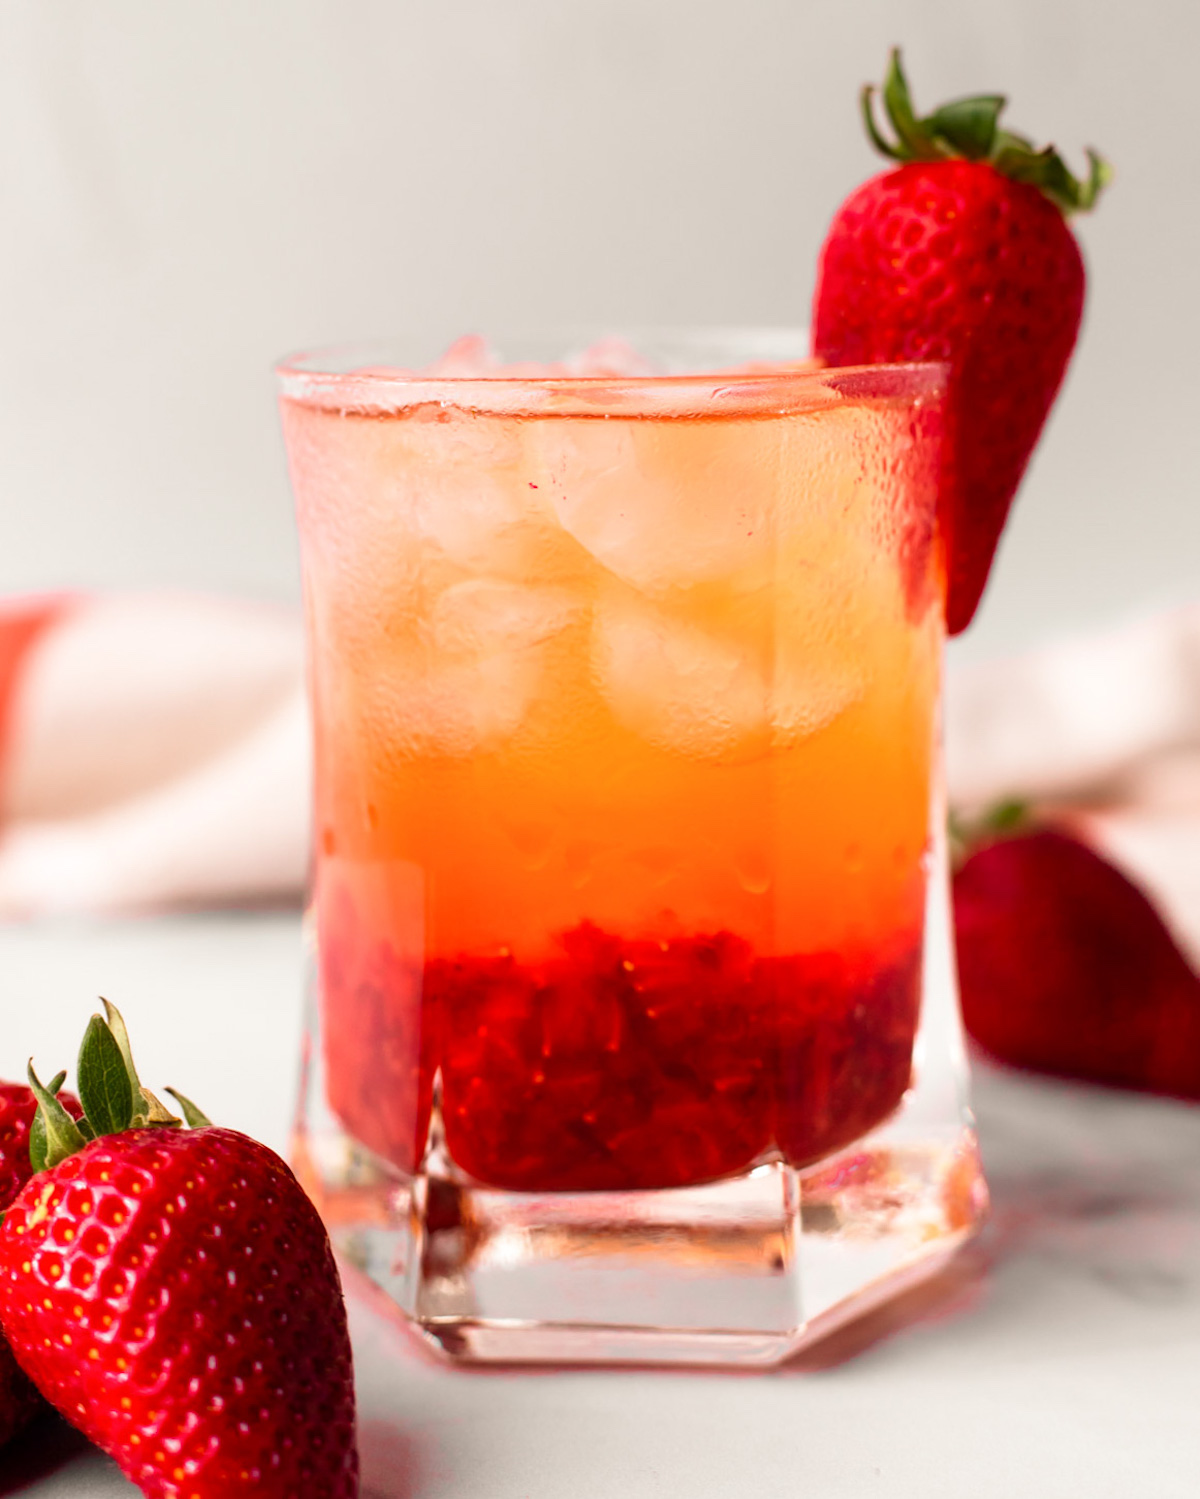 An up-close side shot of a glass of strawberry rose bramble on the counter with strawberries.